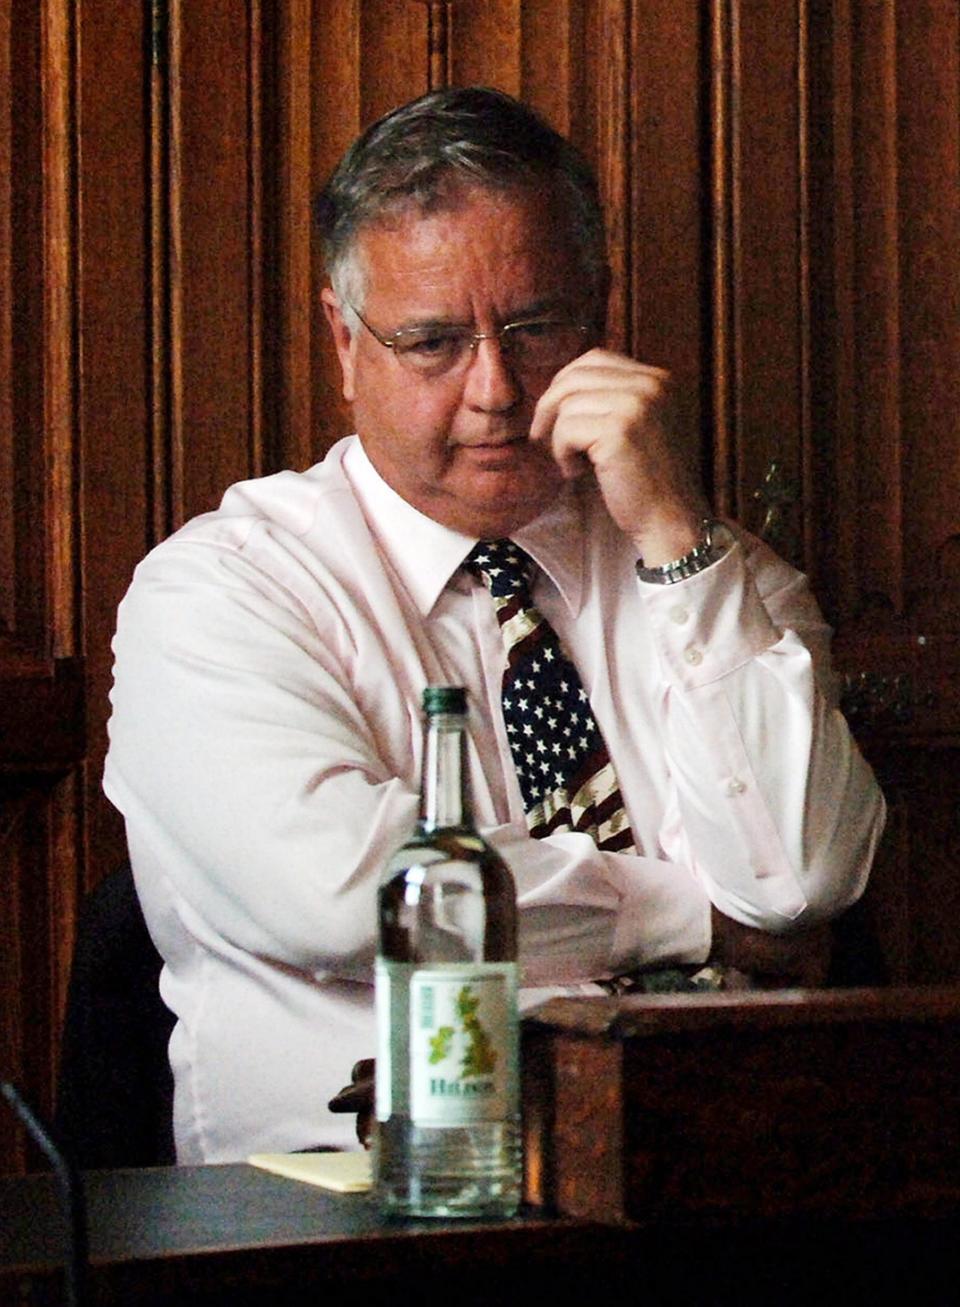 David Wilshire Tory MP who devised the controversial Section 28 and